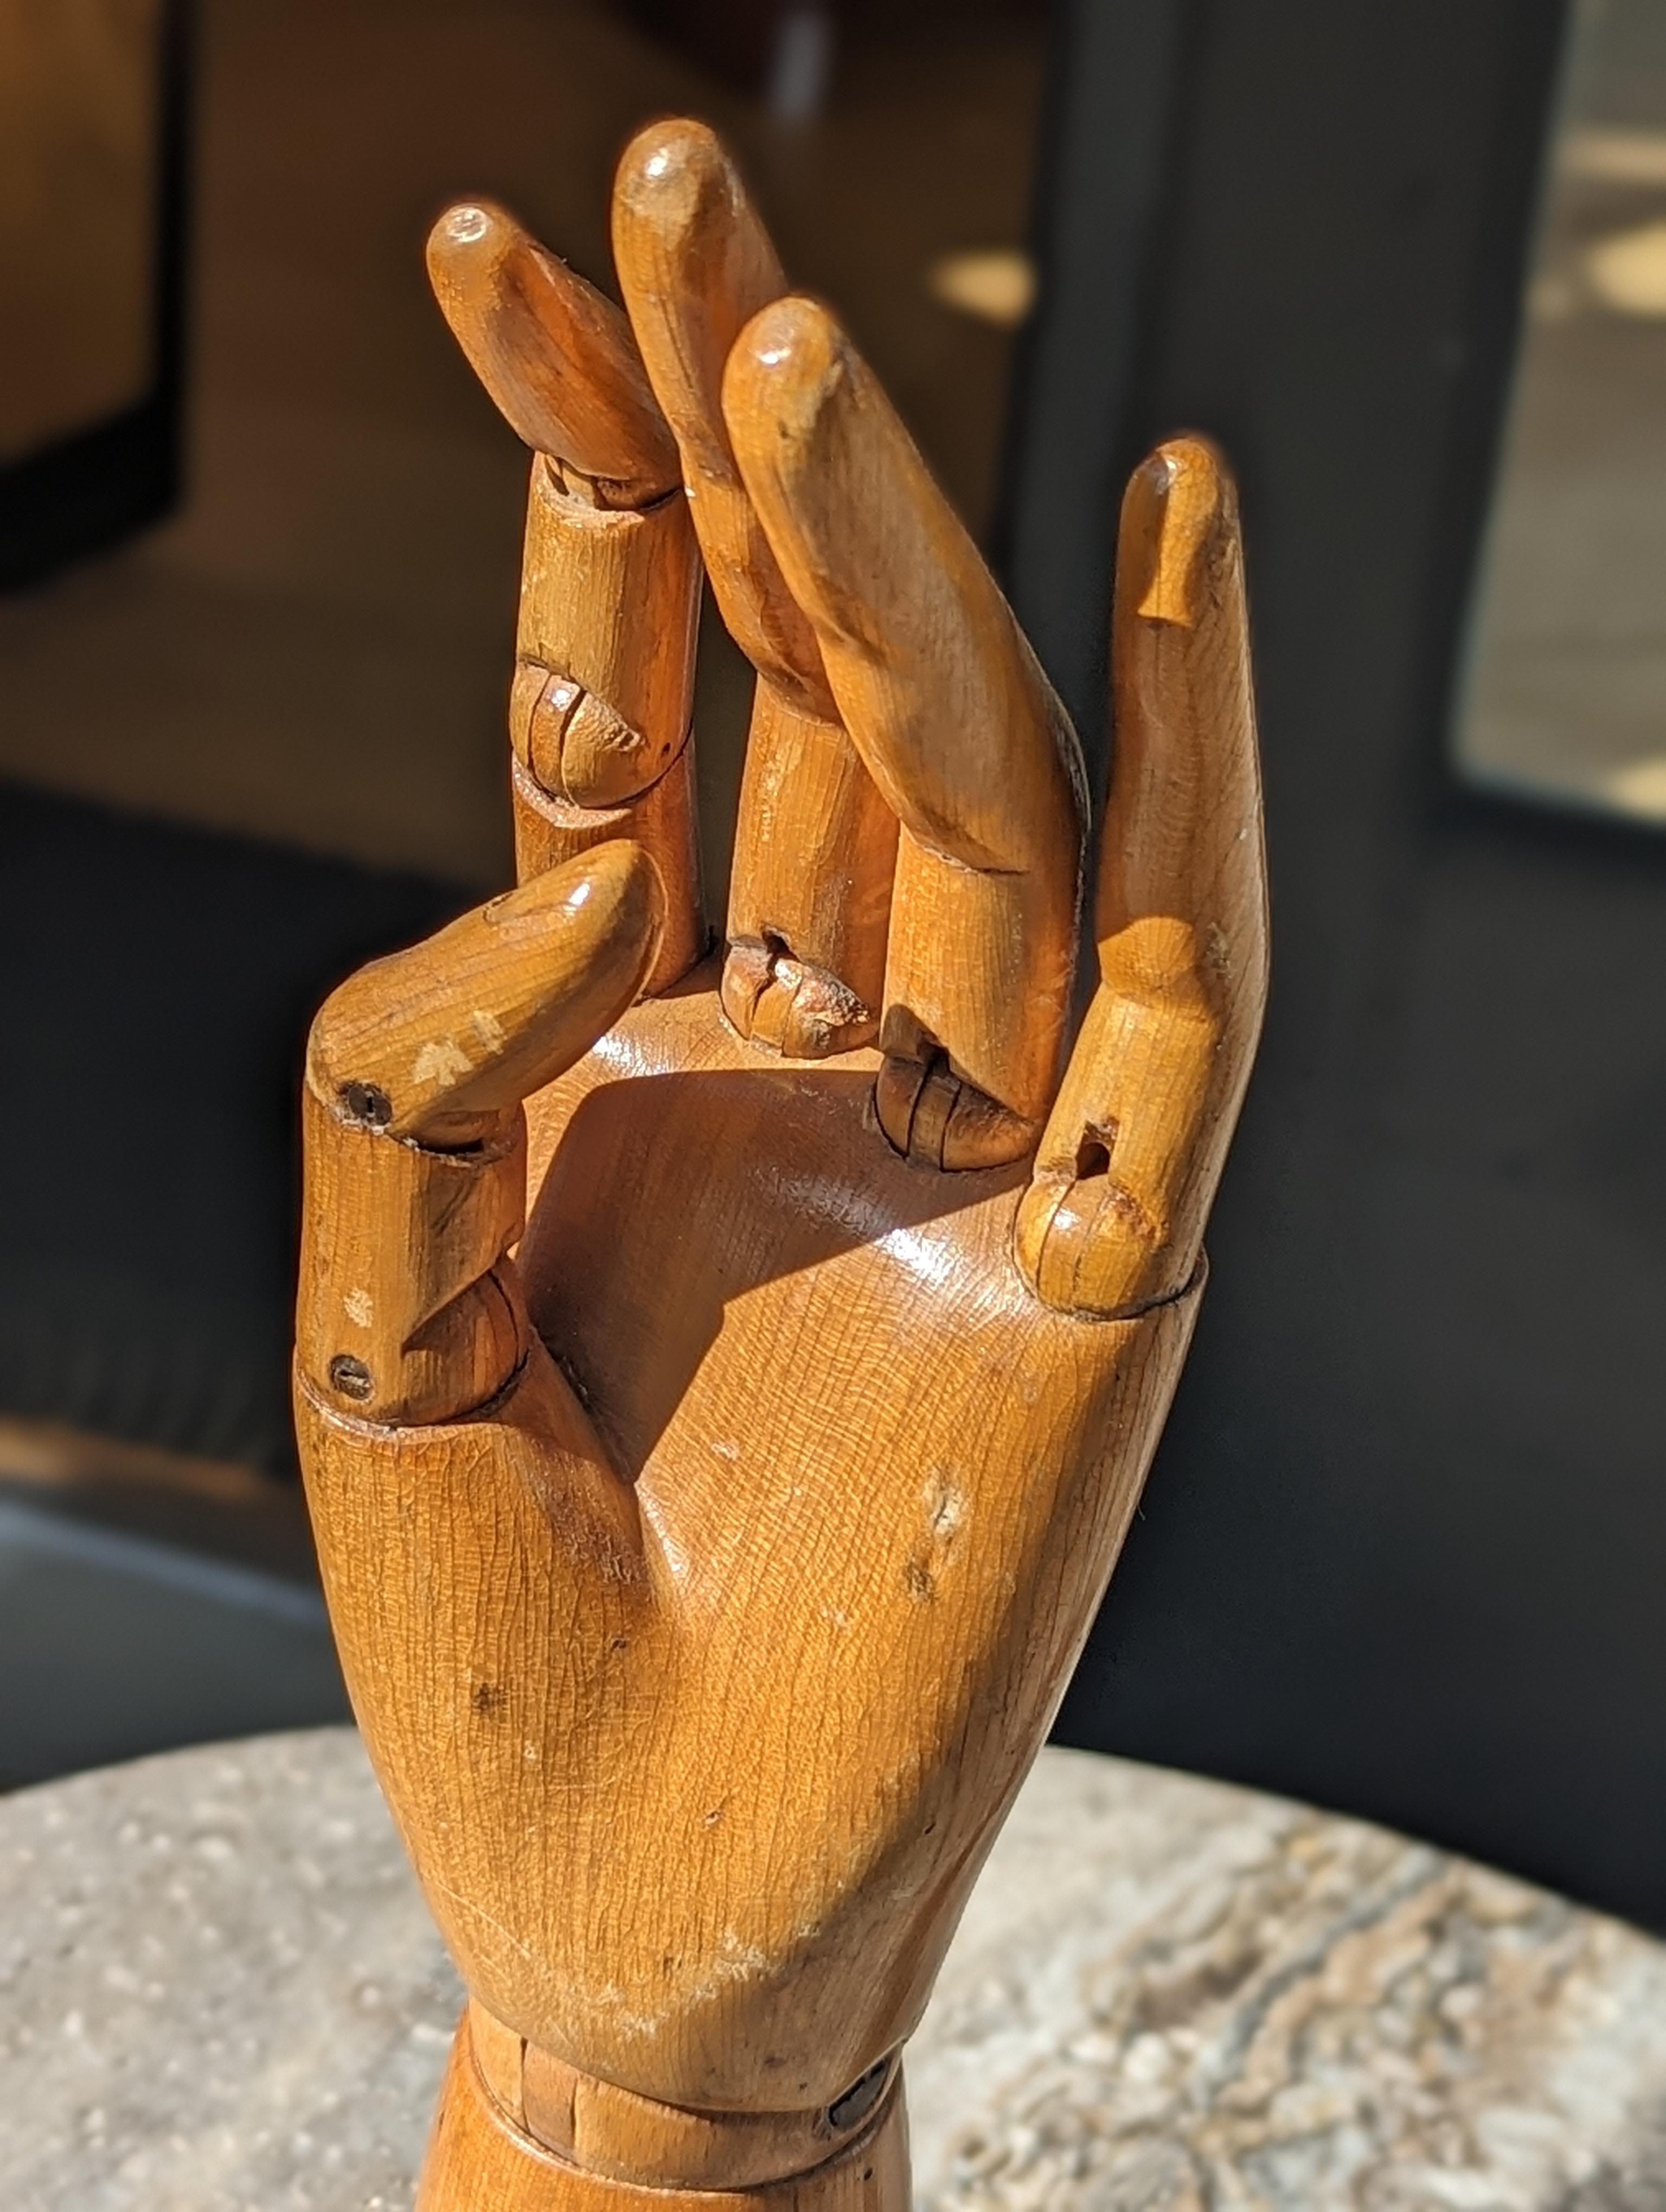 C.1900 Articulated Wooden Hands - Artist's Model or Display For Sale 1